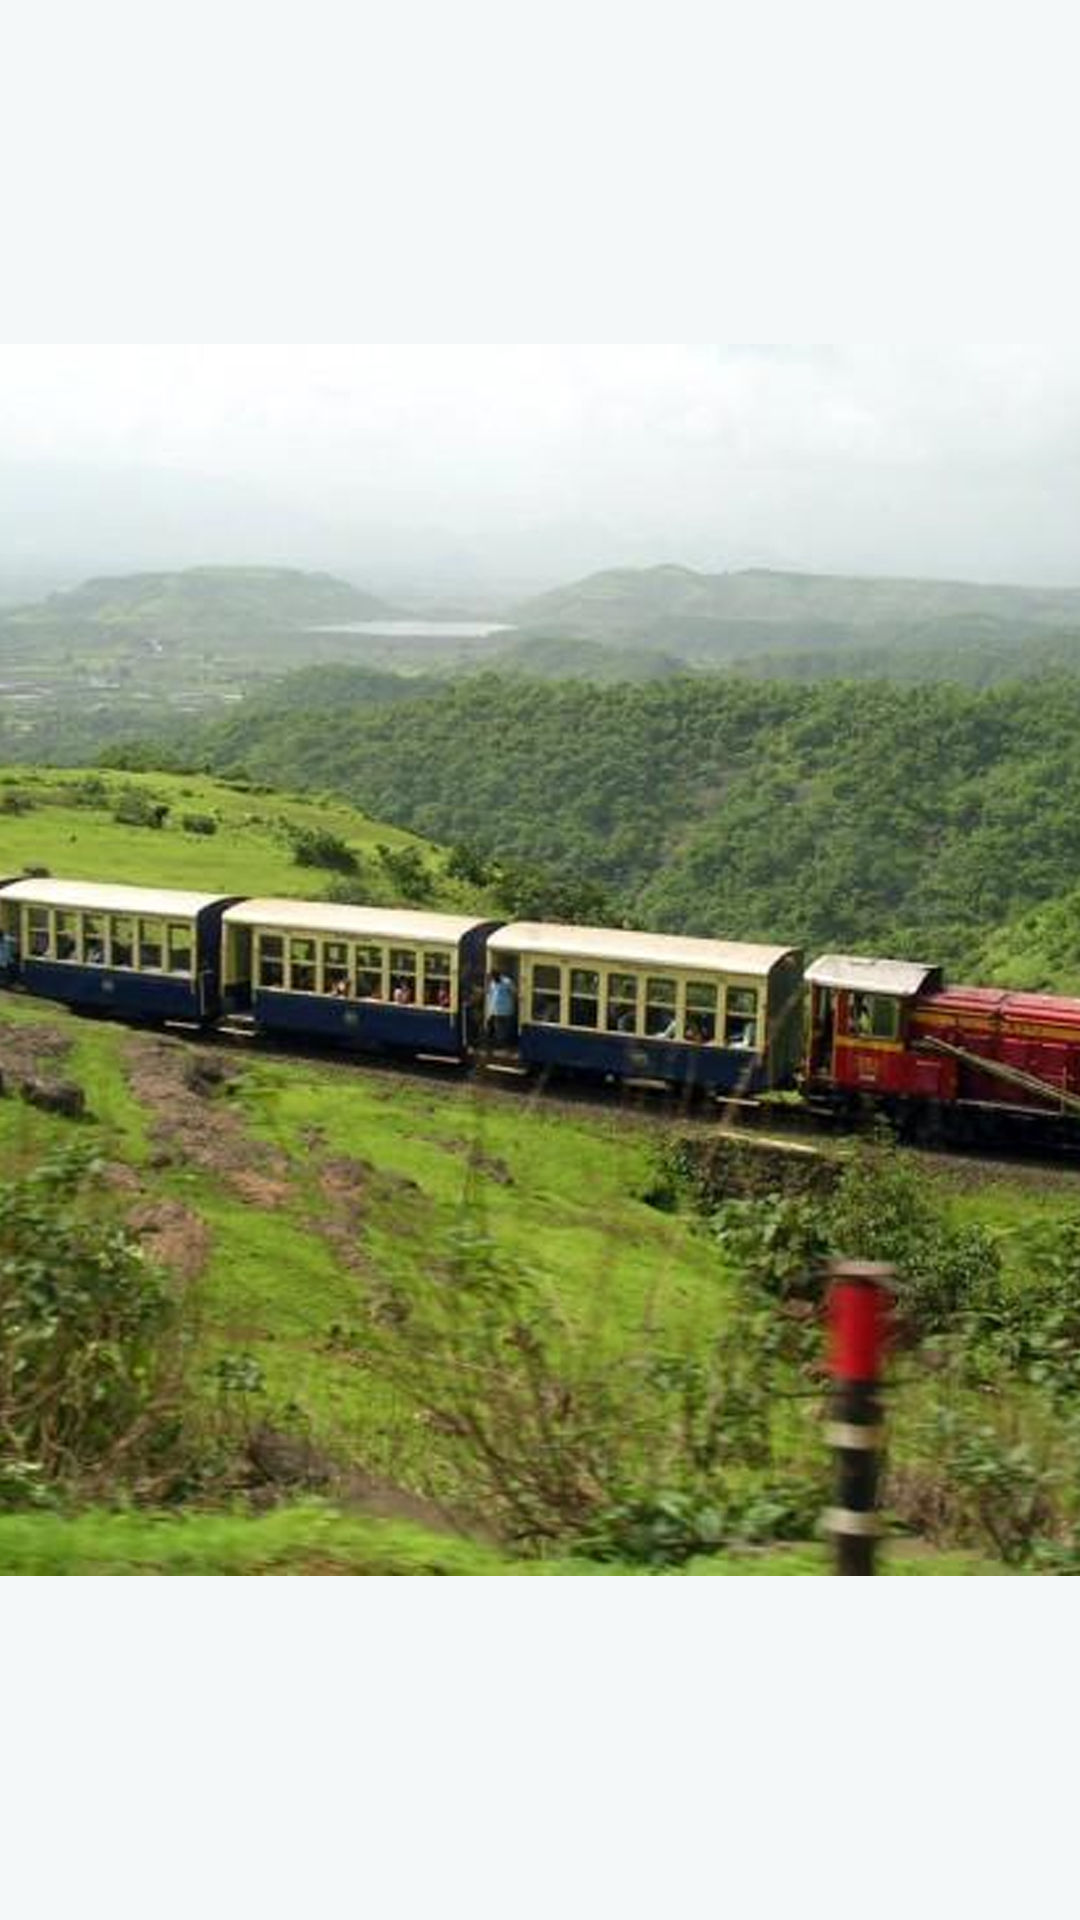 Neral-Matheran Toy train that makes your holiday special, give you joyride of a lifetime